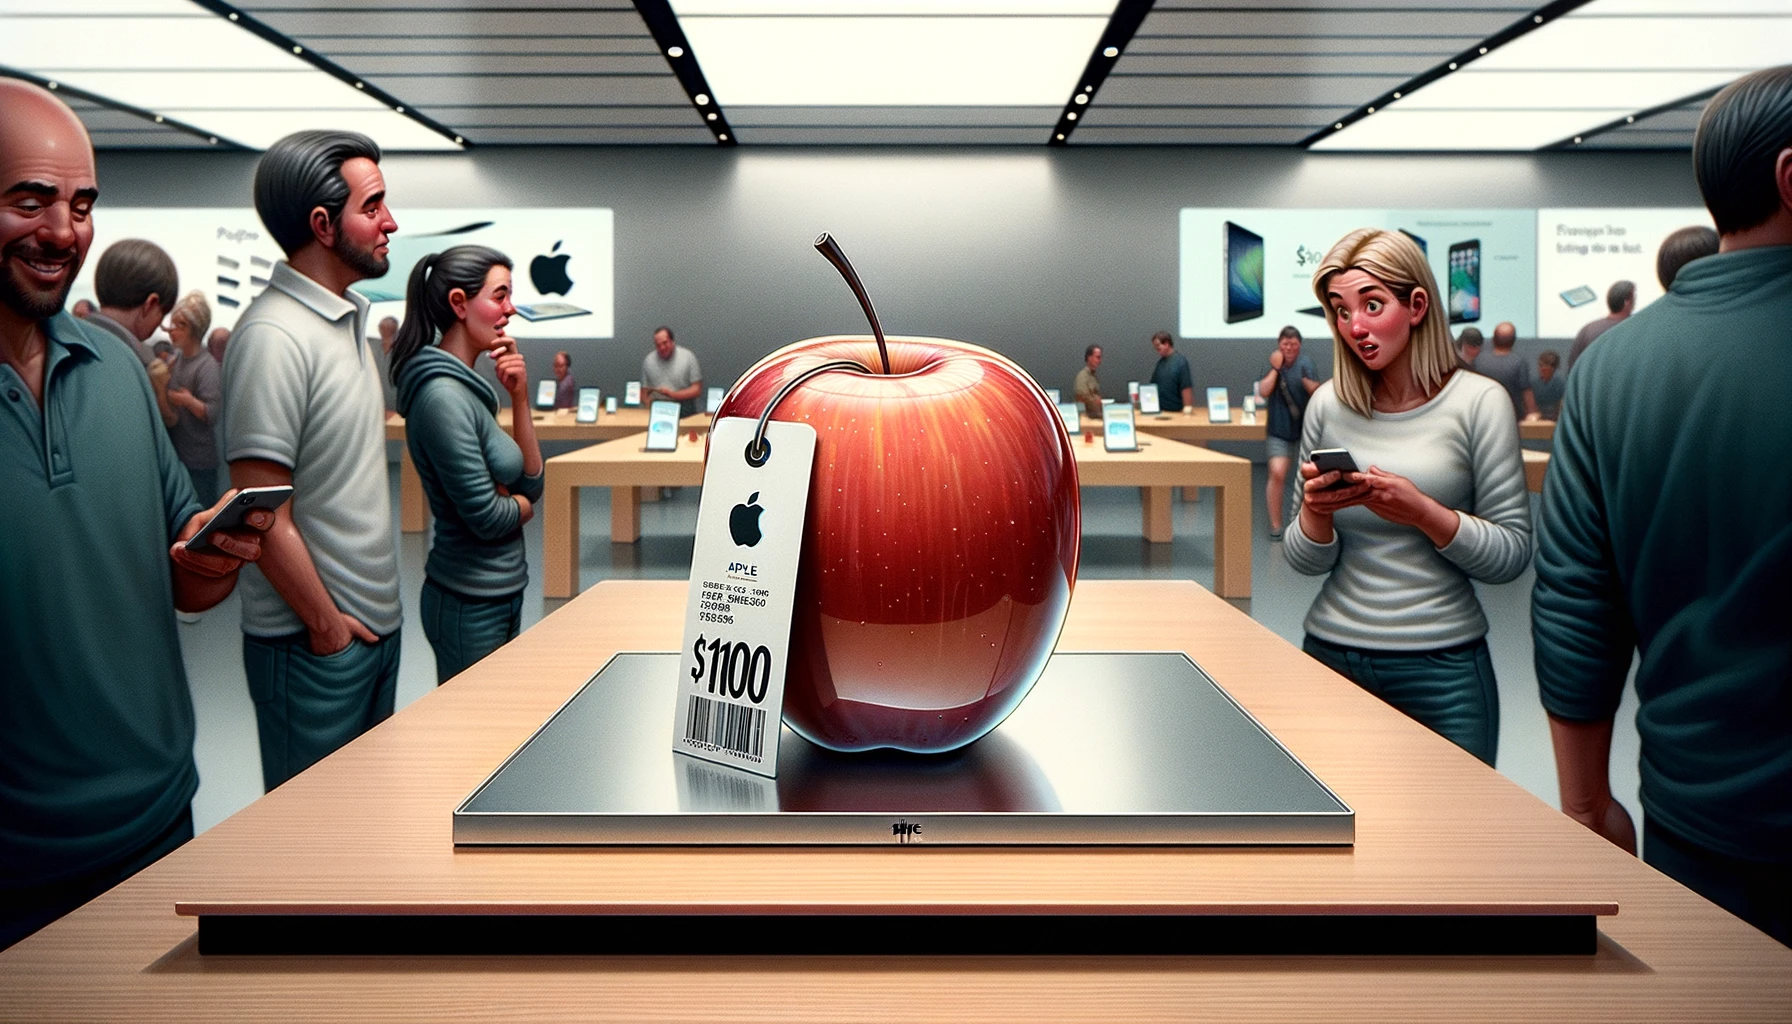 The Apple Price Tag: Overpriced or Overvalued?